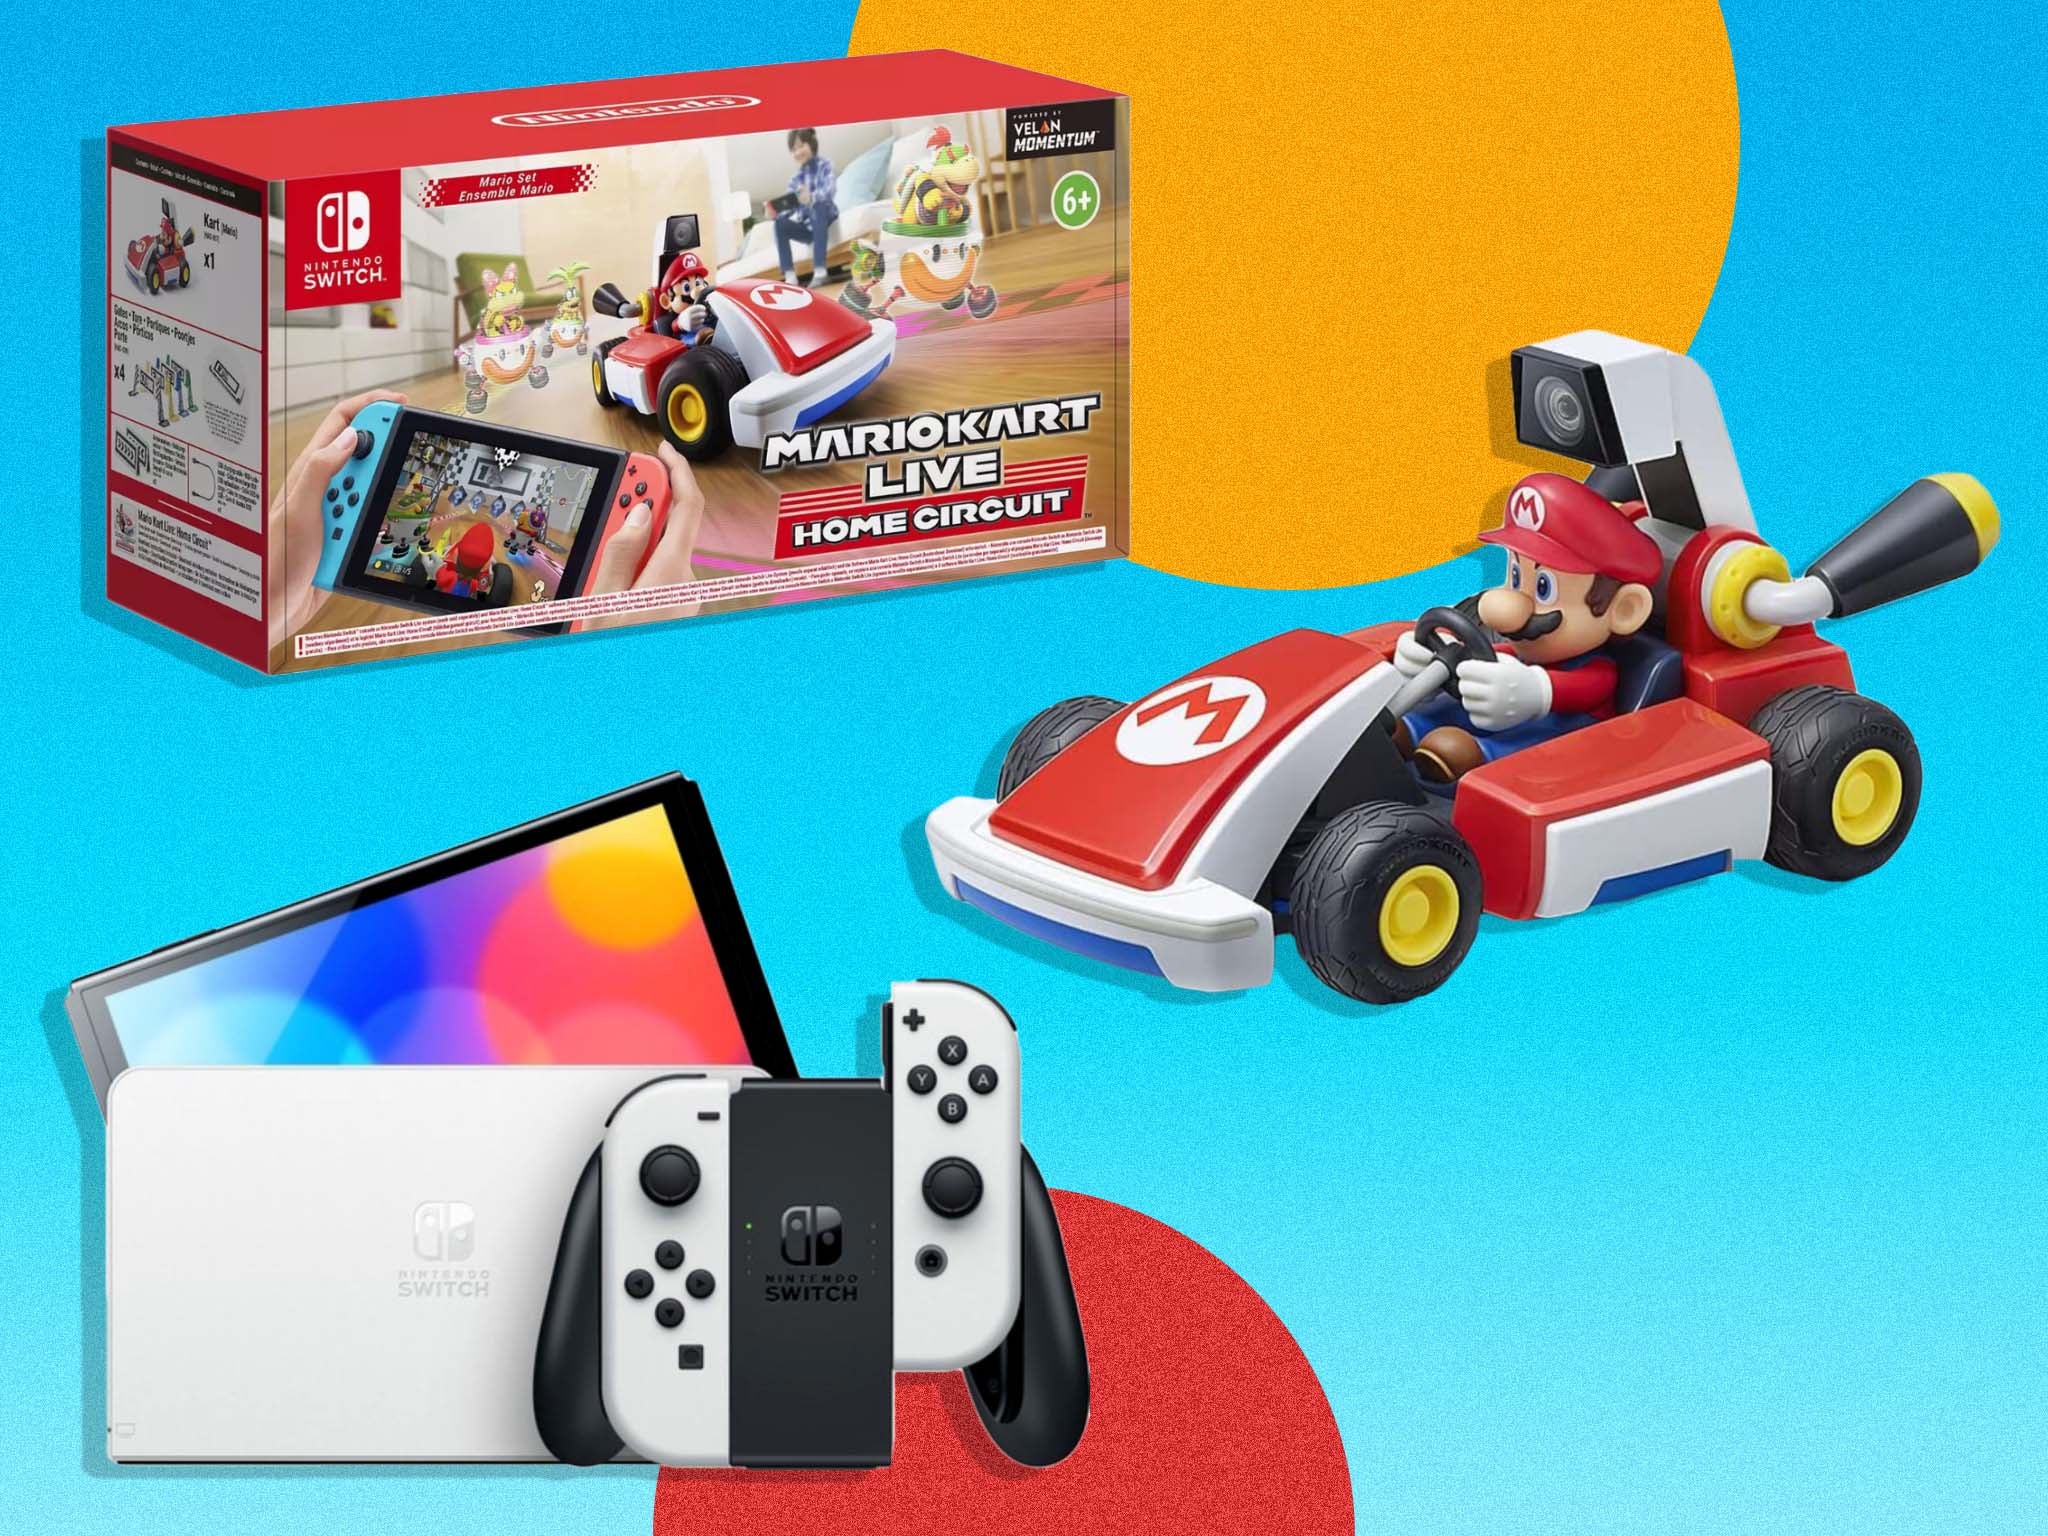 Nintendo Switch OLED deal: Get Mario Kart Live: Home Circuit for free